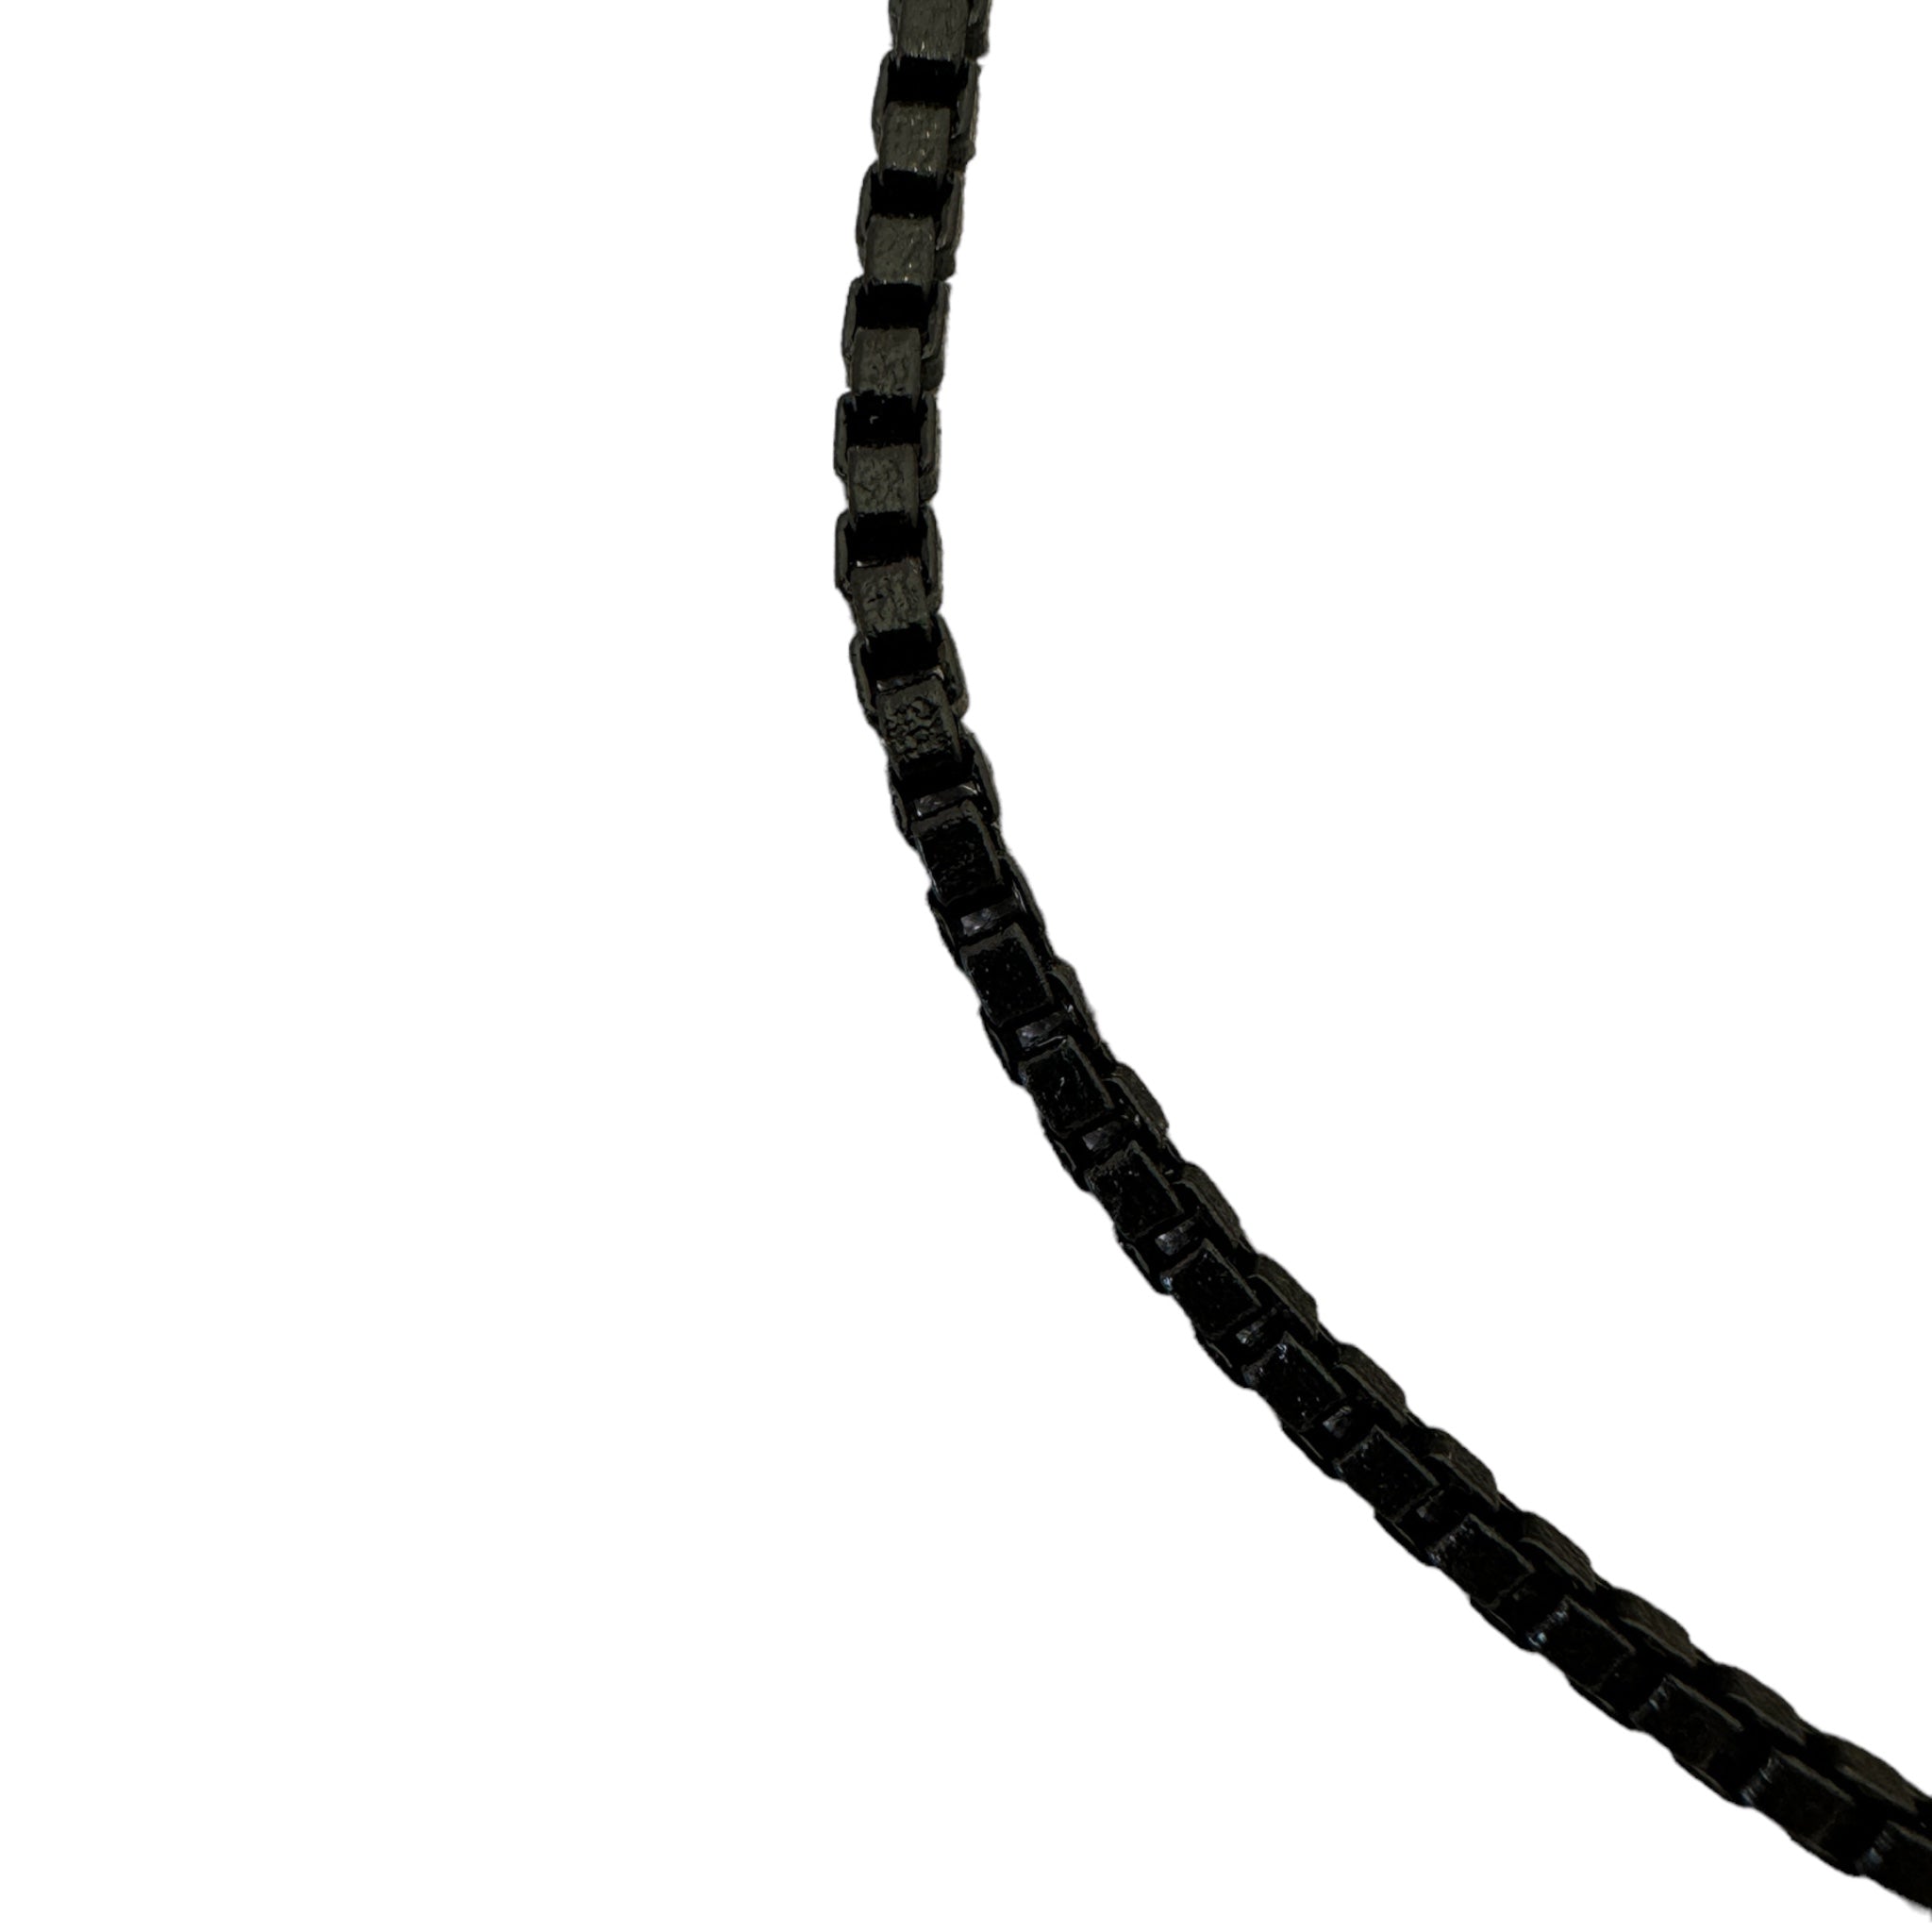 Sheila Fajl Pipa Chain Necklacef in Painted Black and Gold Plated